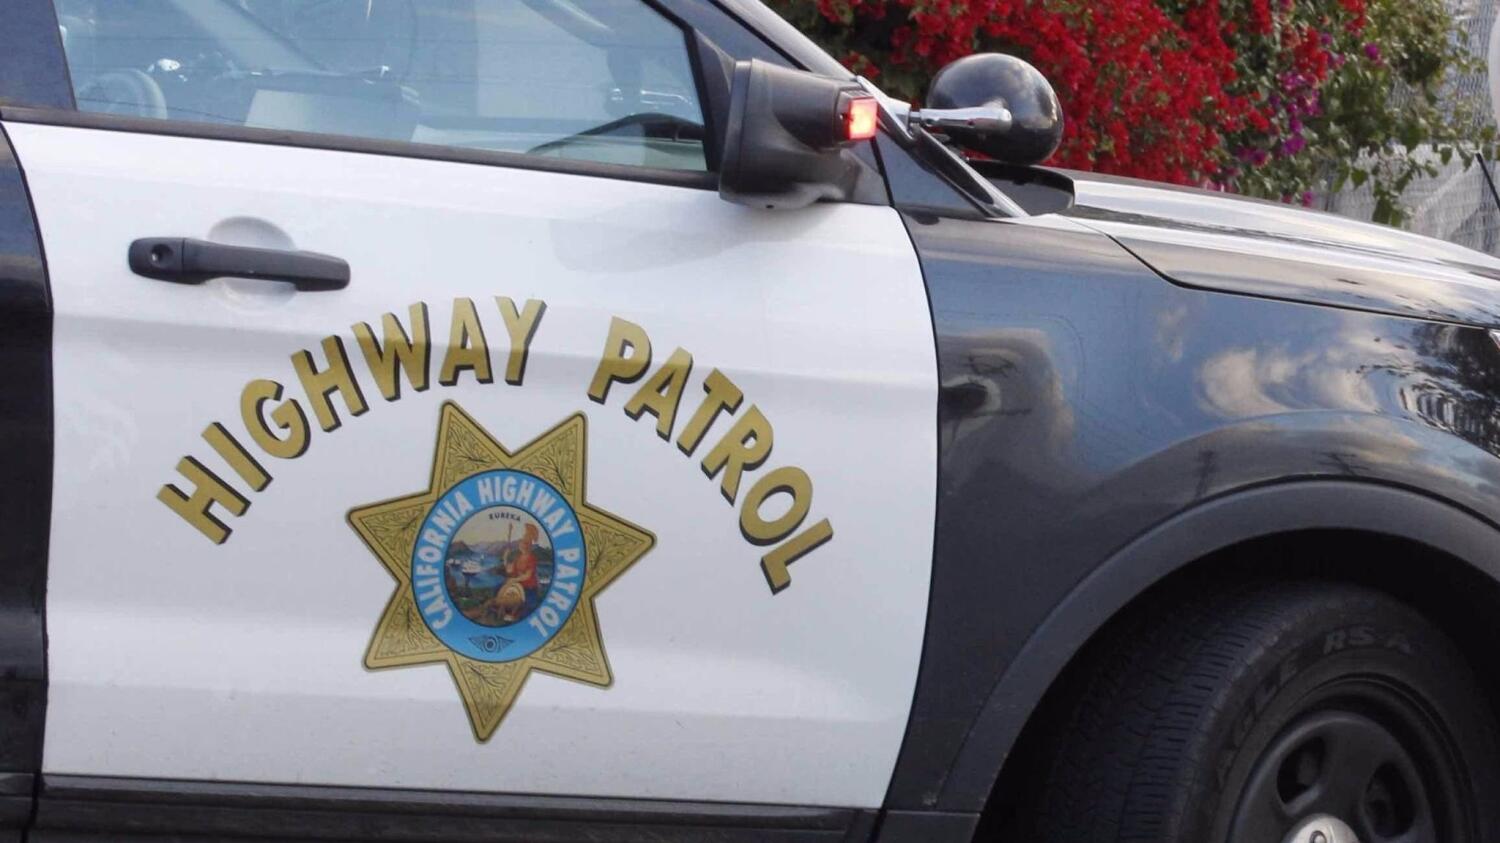 A woman was killed walking on the freeway. The CHP is looking for the driver who hit her